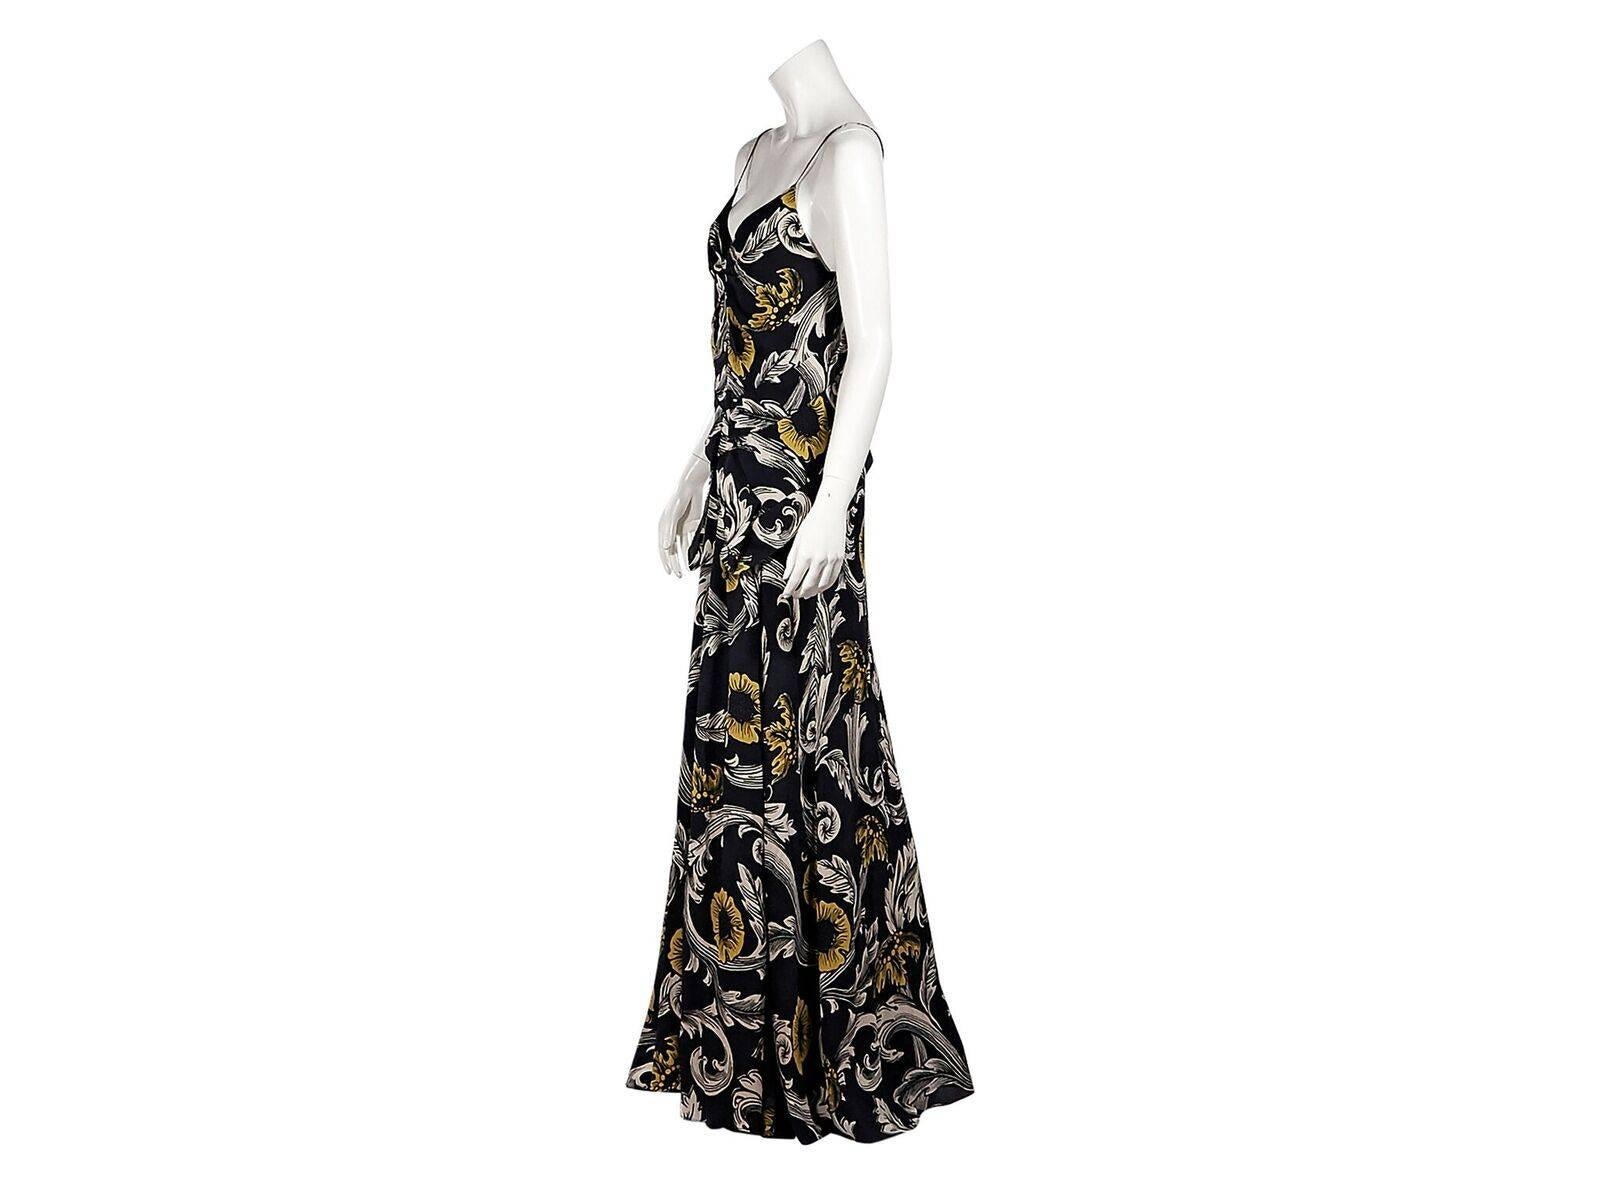 Product details:  Multicolor floral-printed silk maxi dress by Burberry Prorsum.  Deep v-neck.  Sleeveless.  Deep scoopback.  Concealed back zip closure.  Label size IT 40.  30